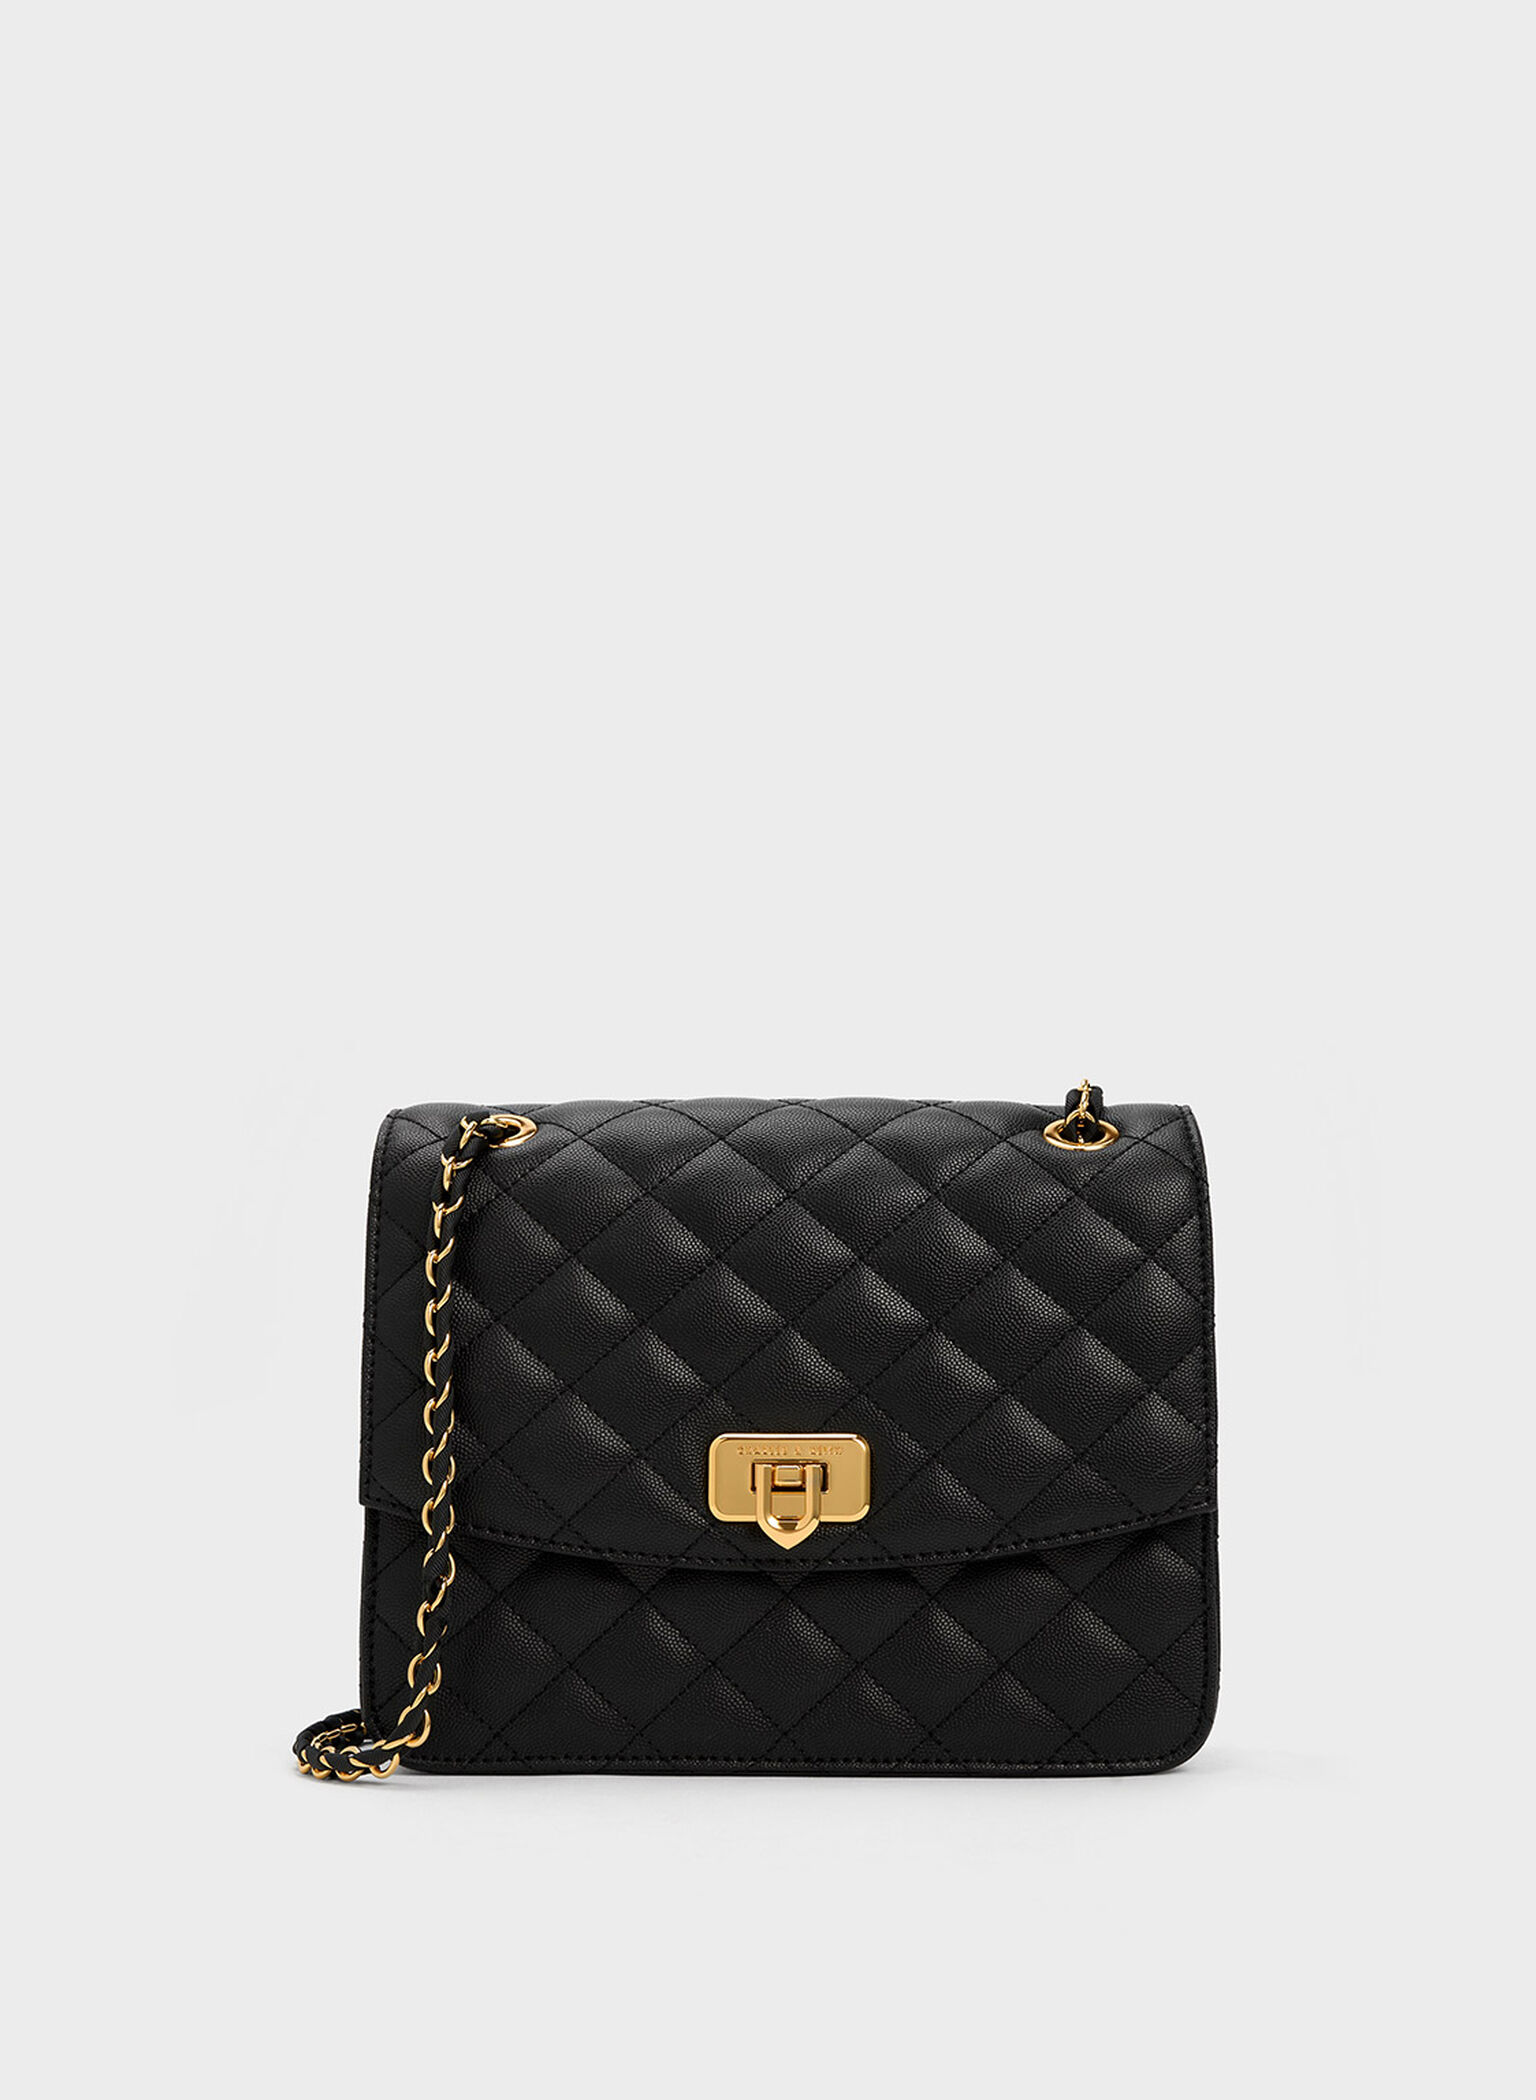 Search results for: 'chanel trendy cc bowling bag egphb7110